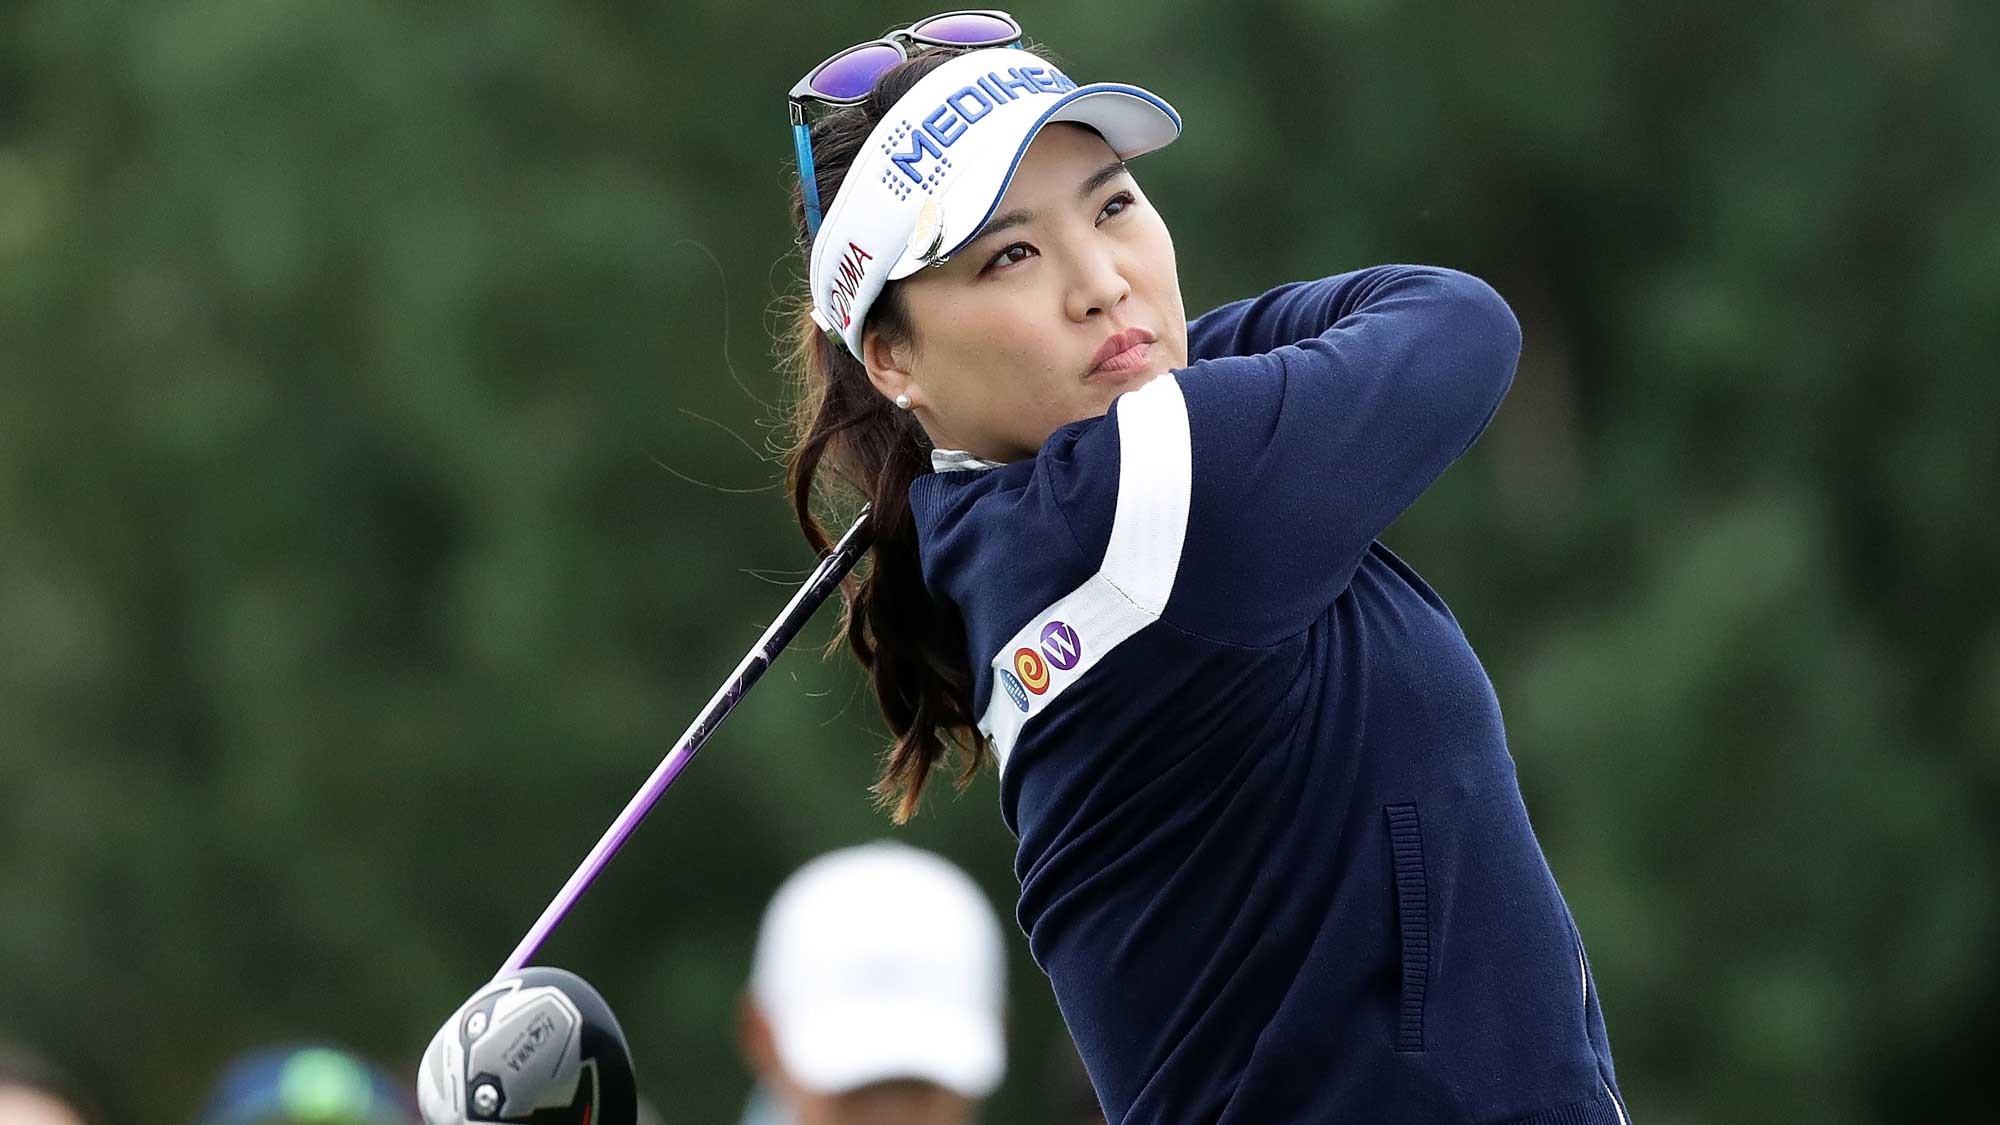 So-Yeon Ryu of South Korea plays a tee shot on the 2nd hole during the first round of the LPGA KEB Hana Bank Championship